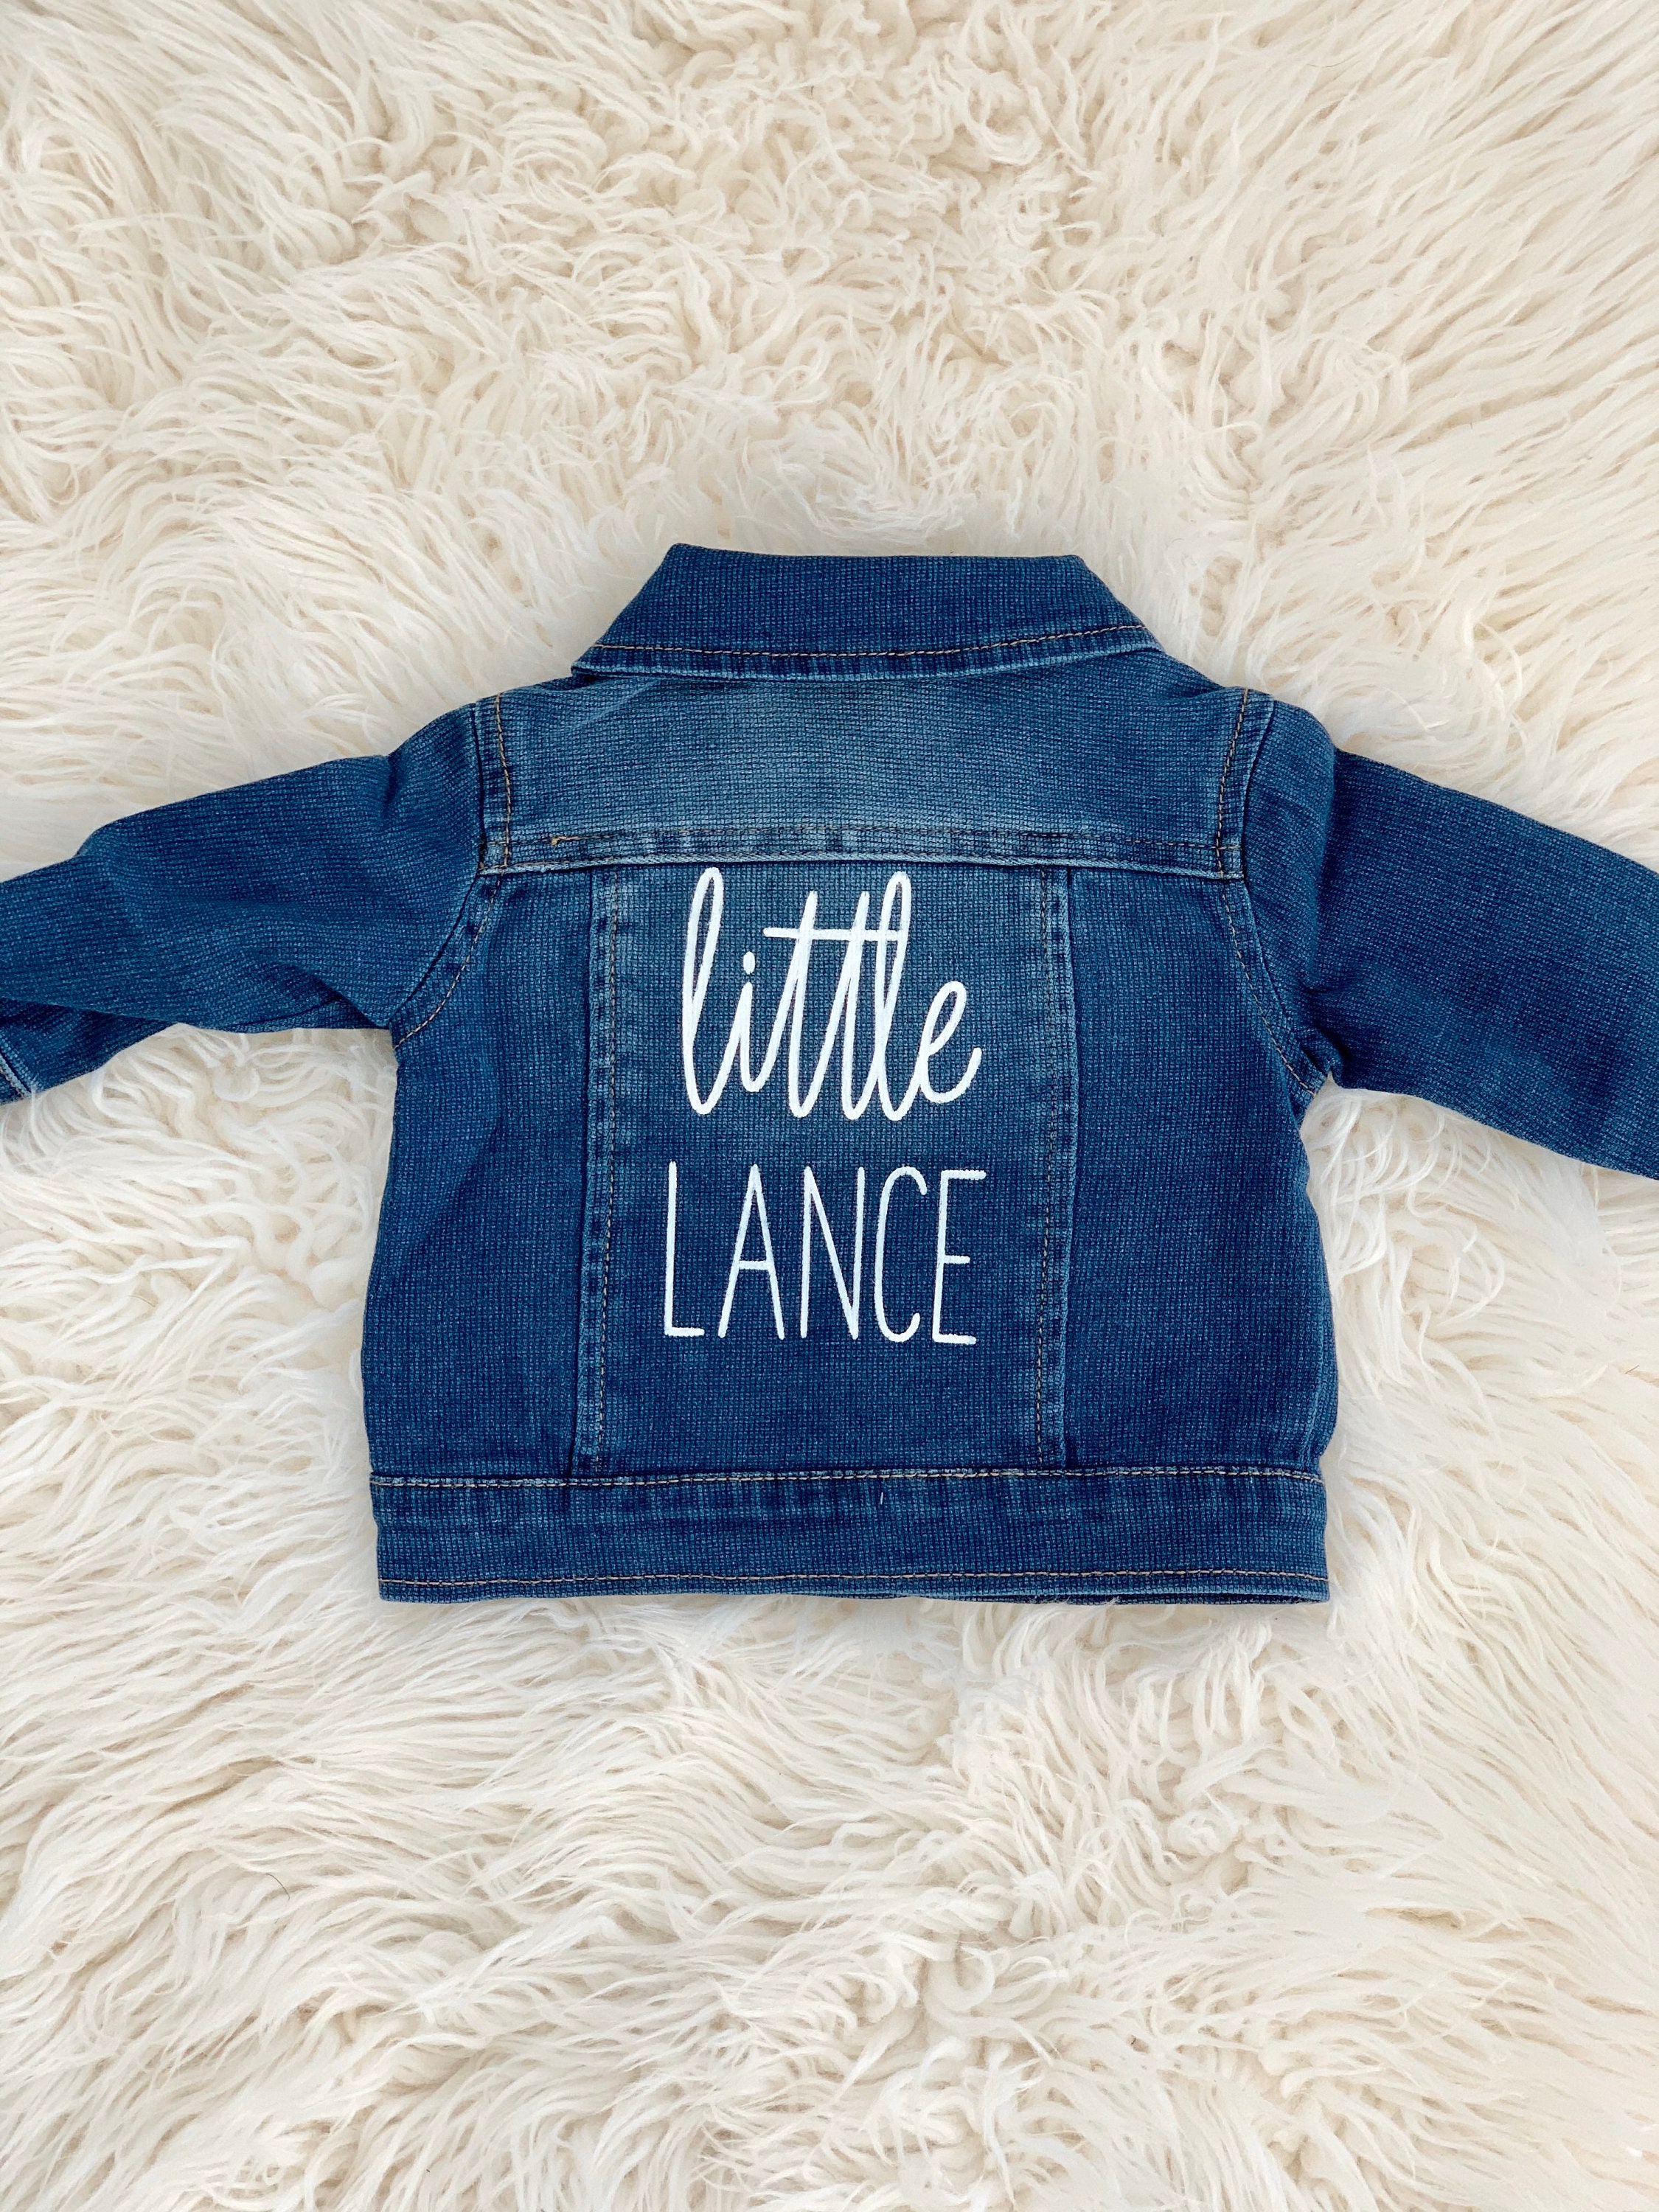 Hand Painted Baby Announcement Jean Jacket / Pregnancy | Etsy